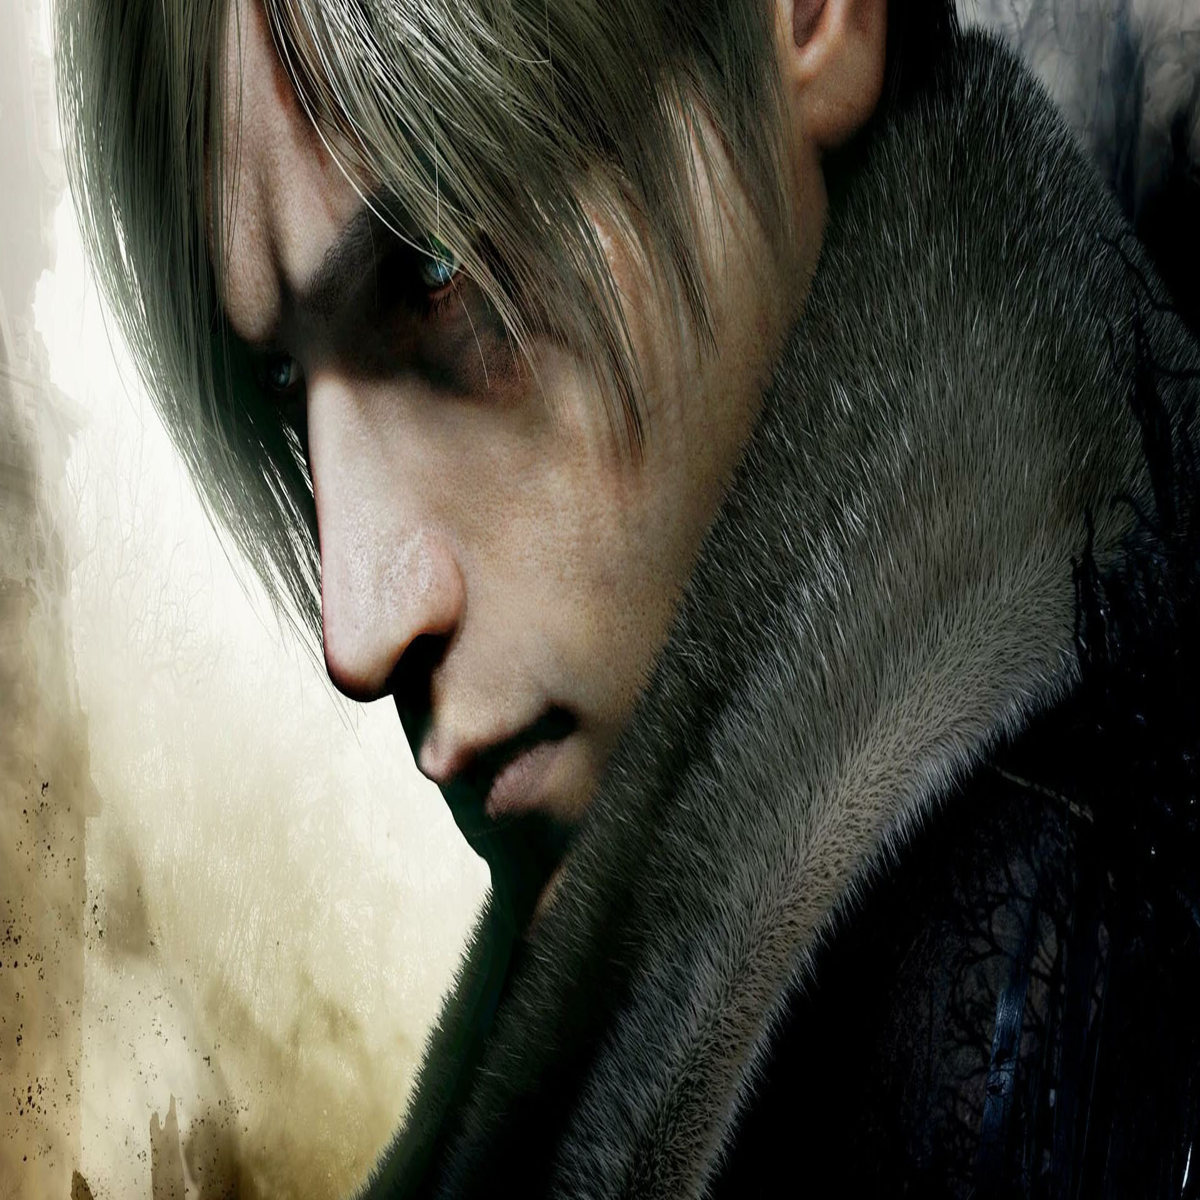 Resident Evil 4 Mod Transports Remake's Best Addition to the Original Game.  Gaming news - eSports events review, analytics, announcements, interviews,  statistics - j7VJxxWfU